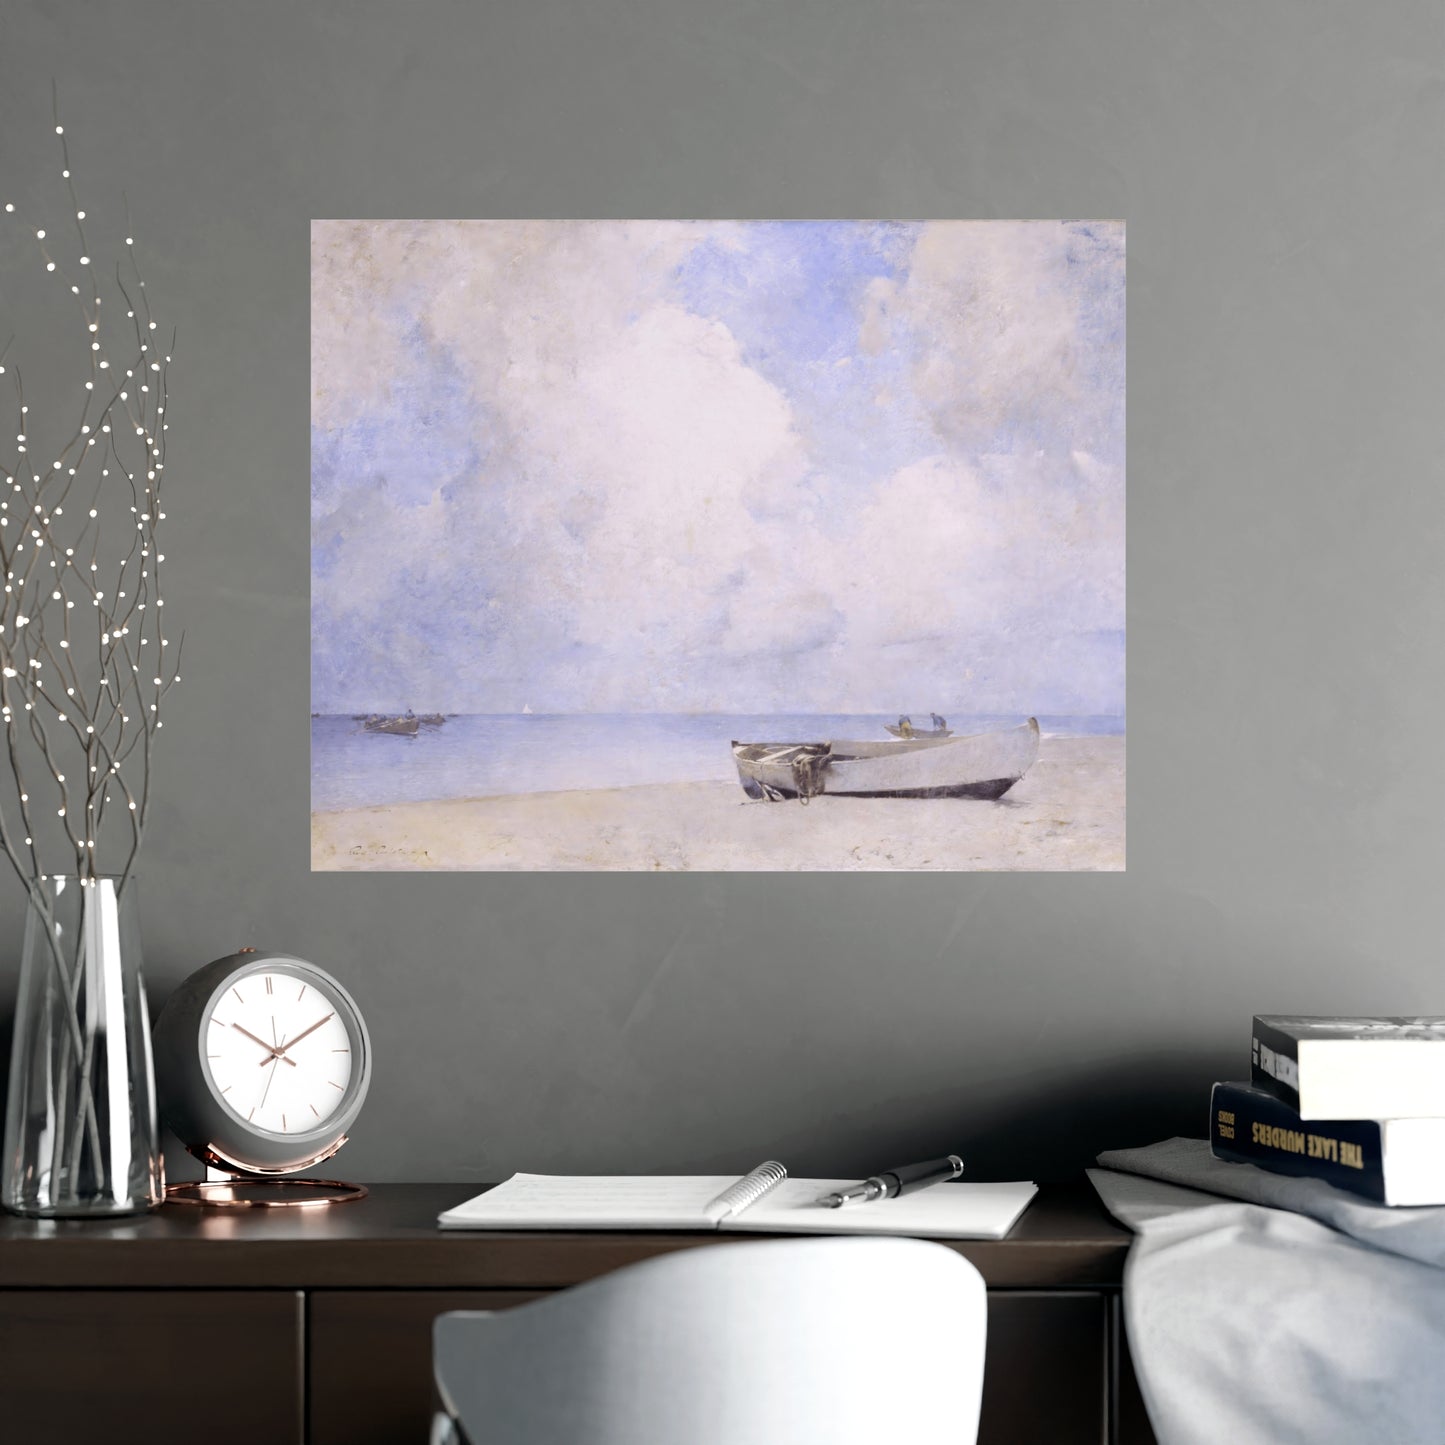 Boat and Cloud Print